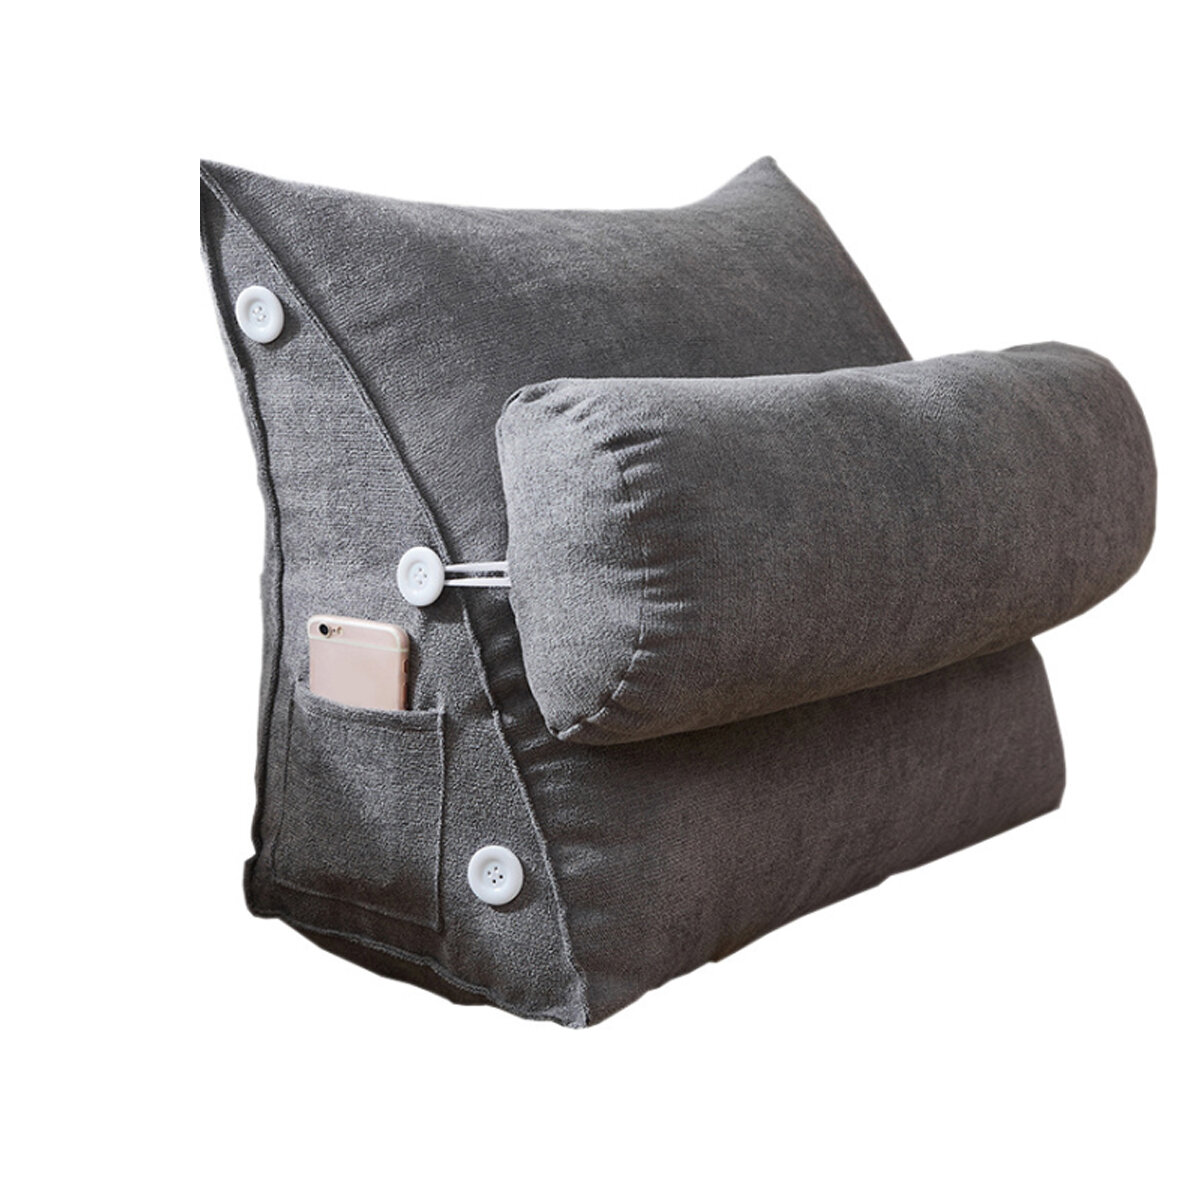 

Adjustable Back Wedge Cushion Pillow Triangle Rest Reading Pillow Lumbar Office Cushion with Pocket for Home Sofa Bed